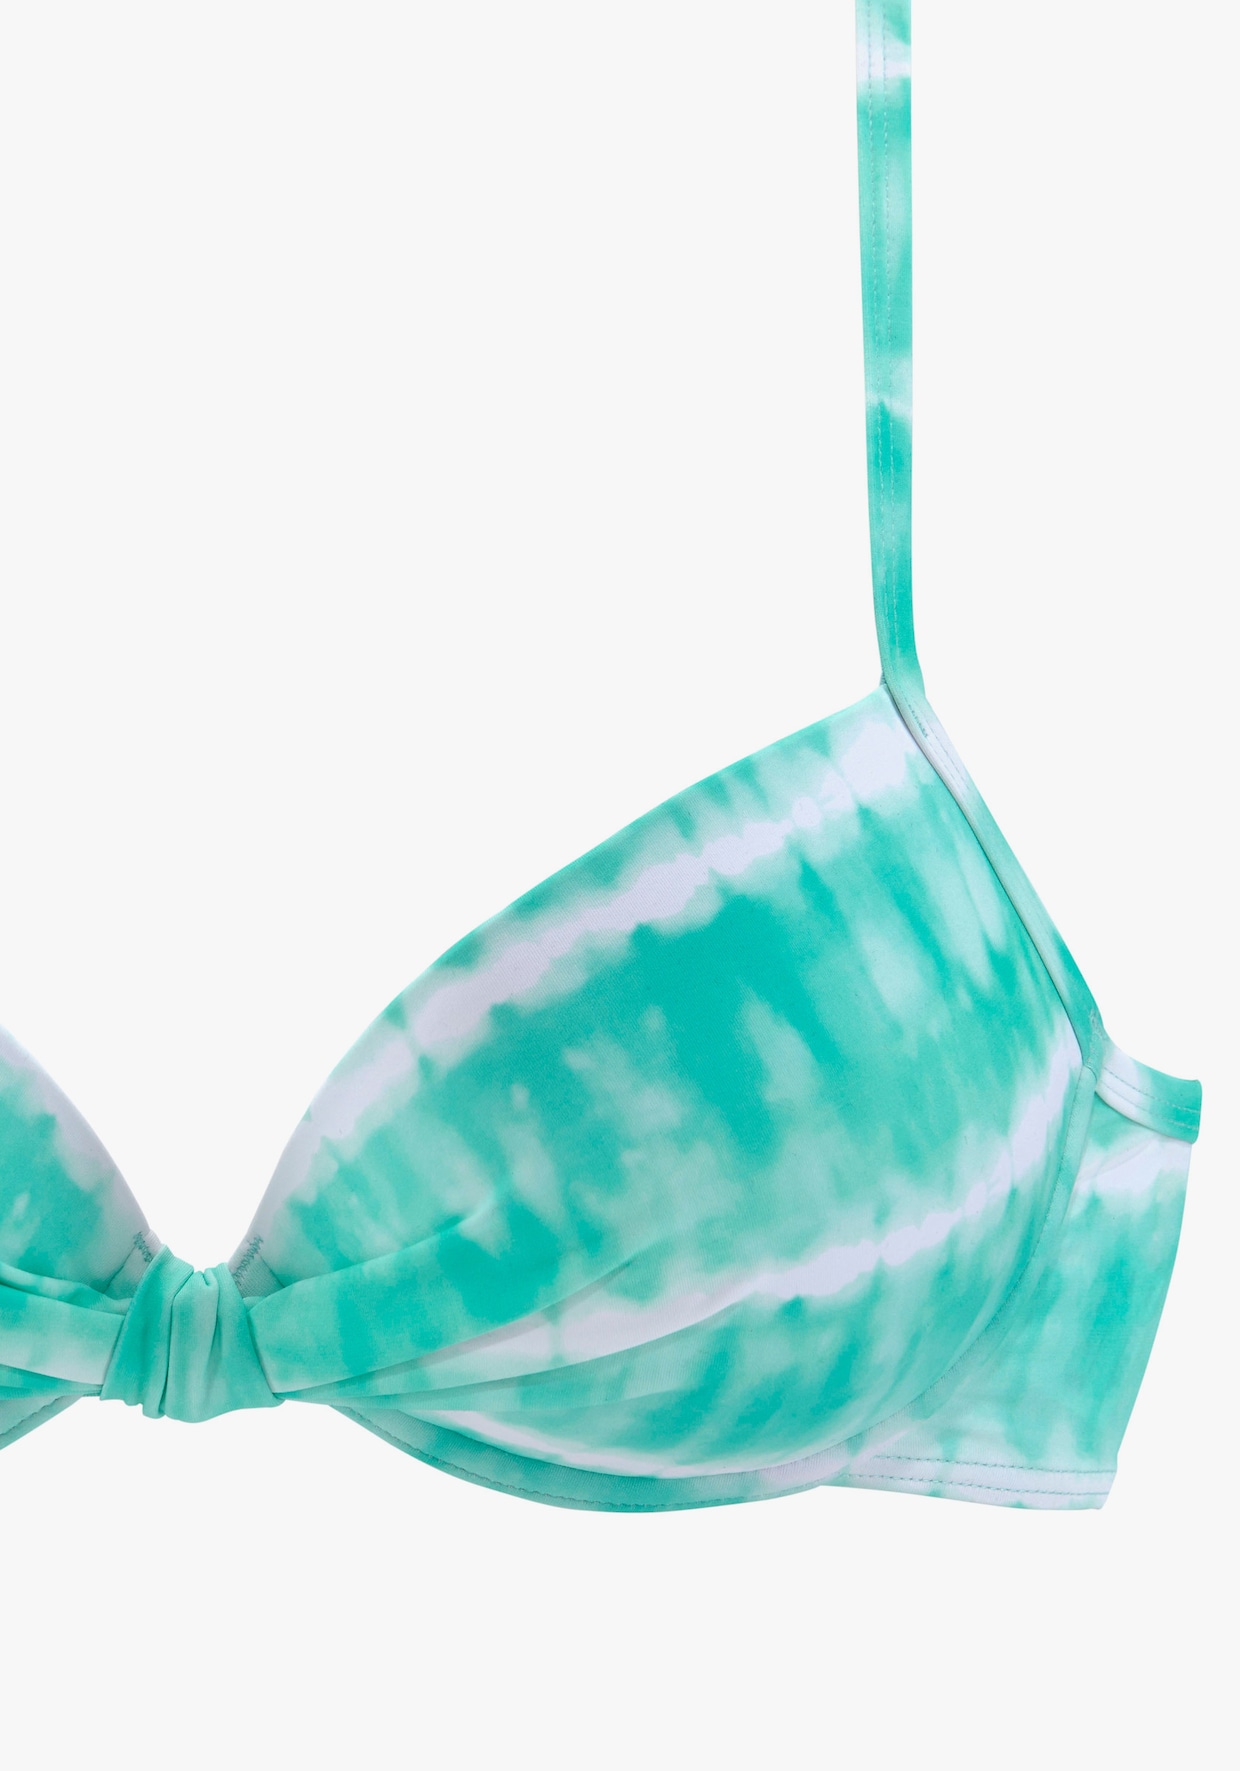 s.Oliver Beugelbikinitop - turquoise/wit